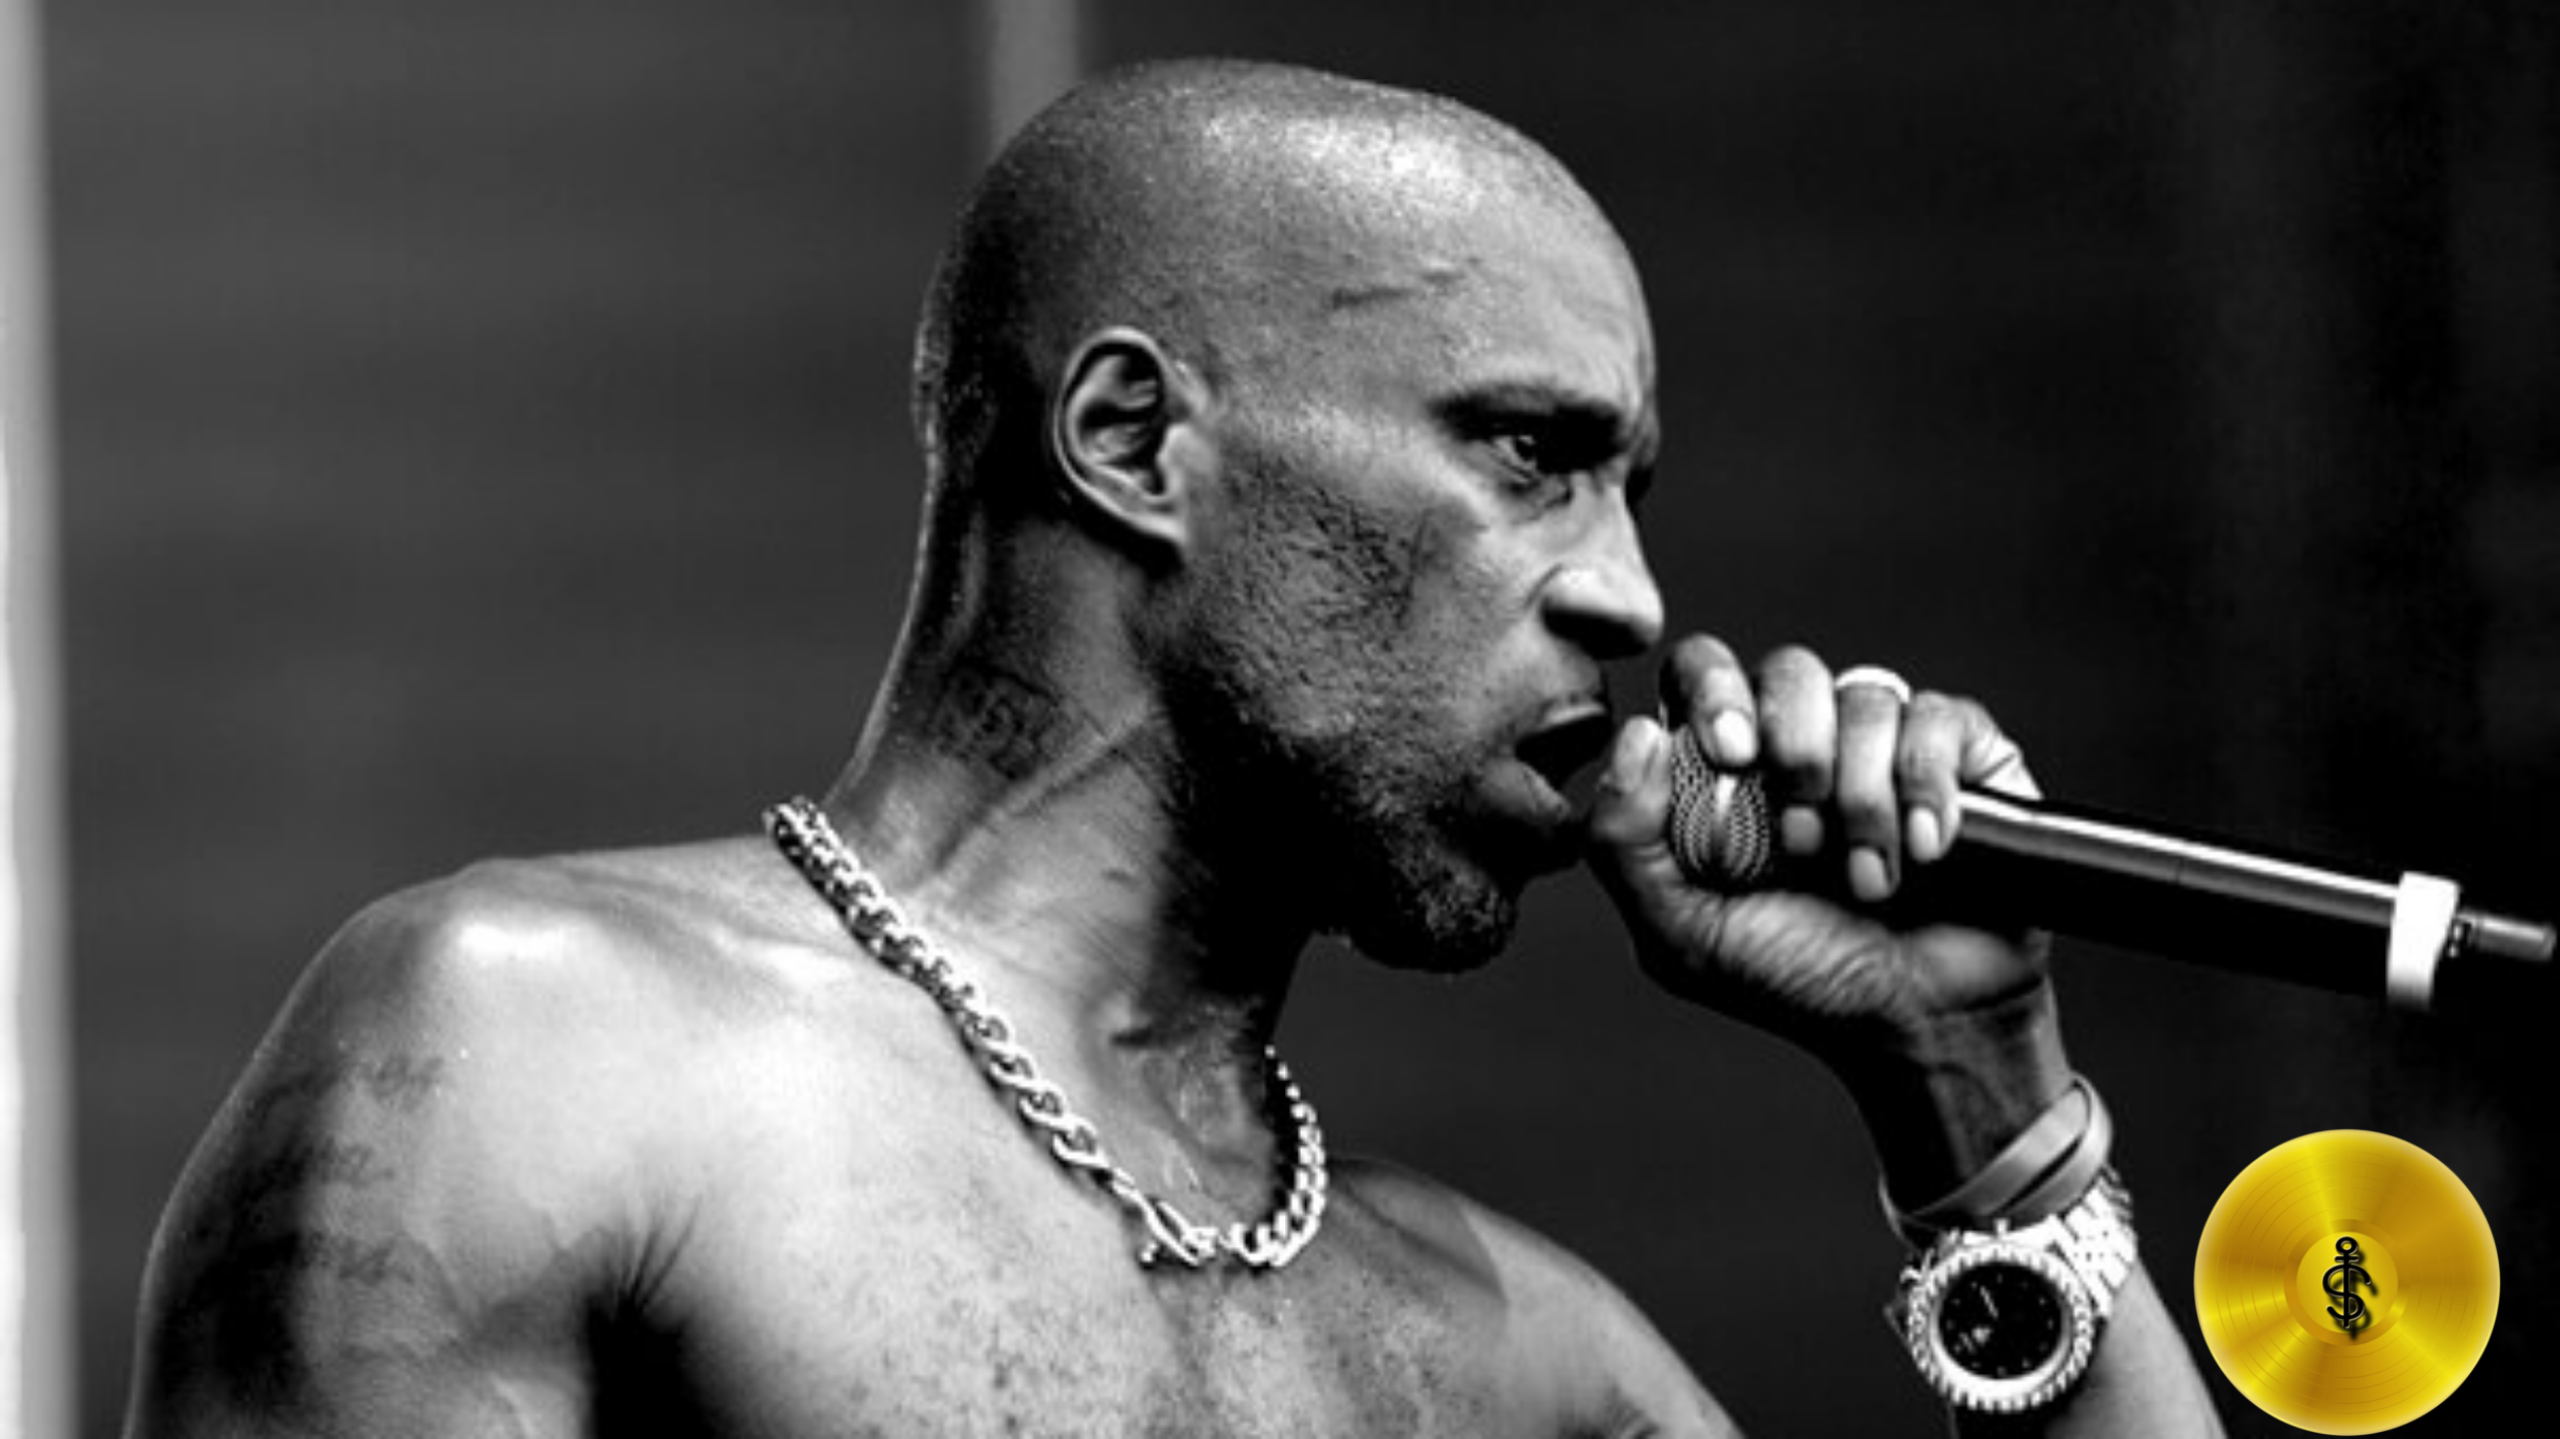 DMX Drops First Details About Upcoming Project!